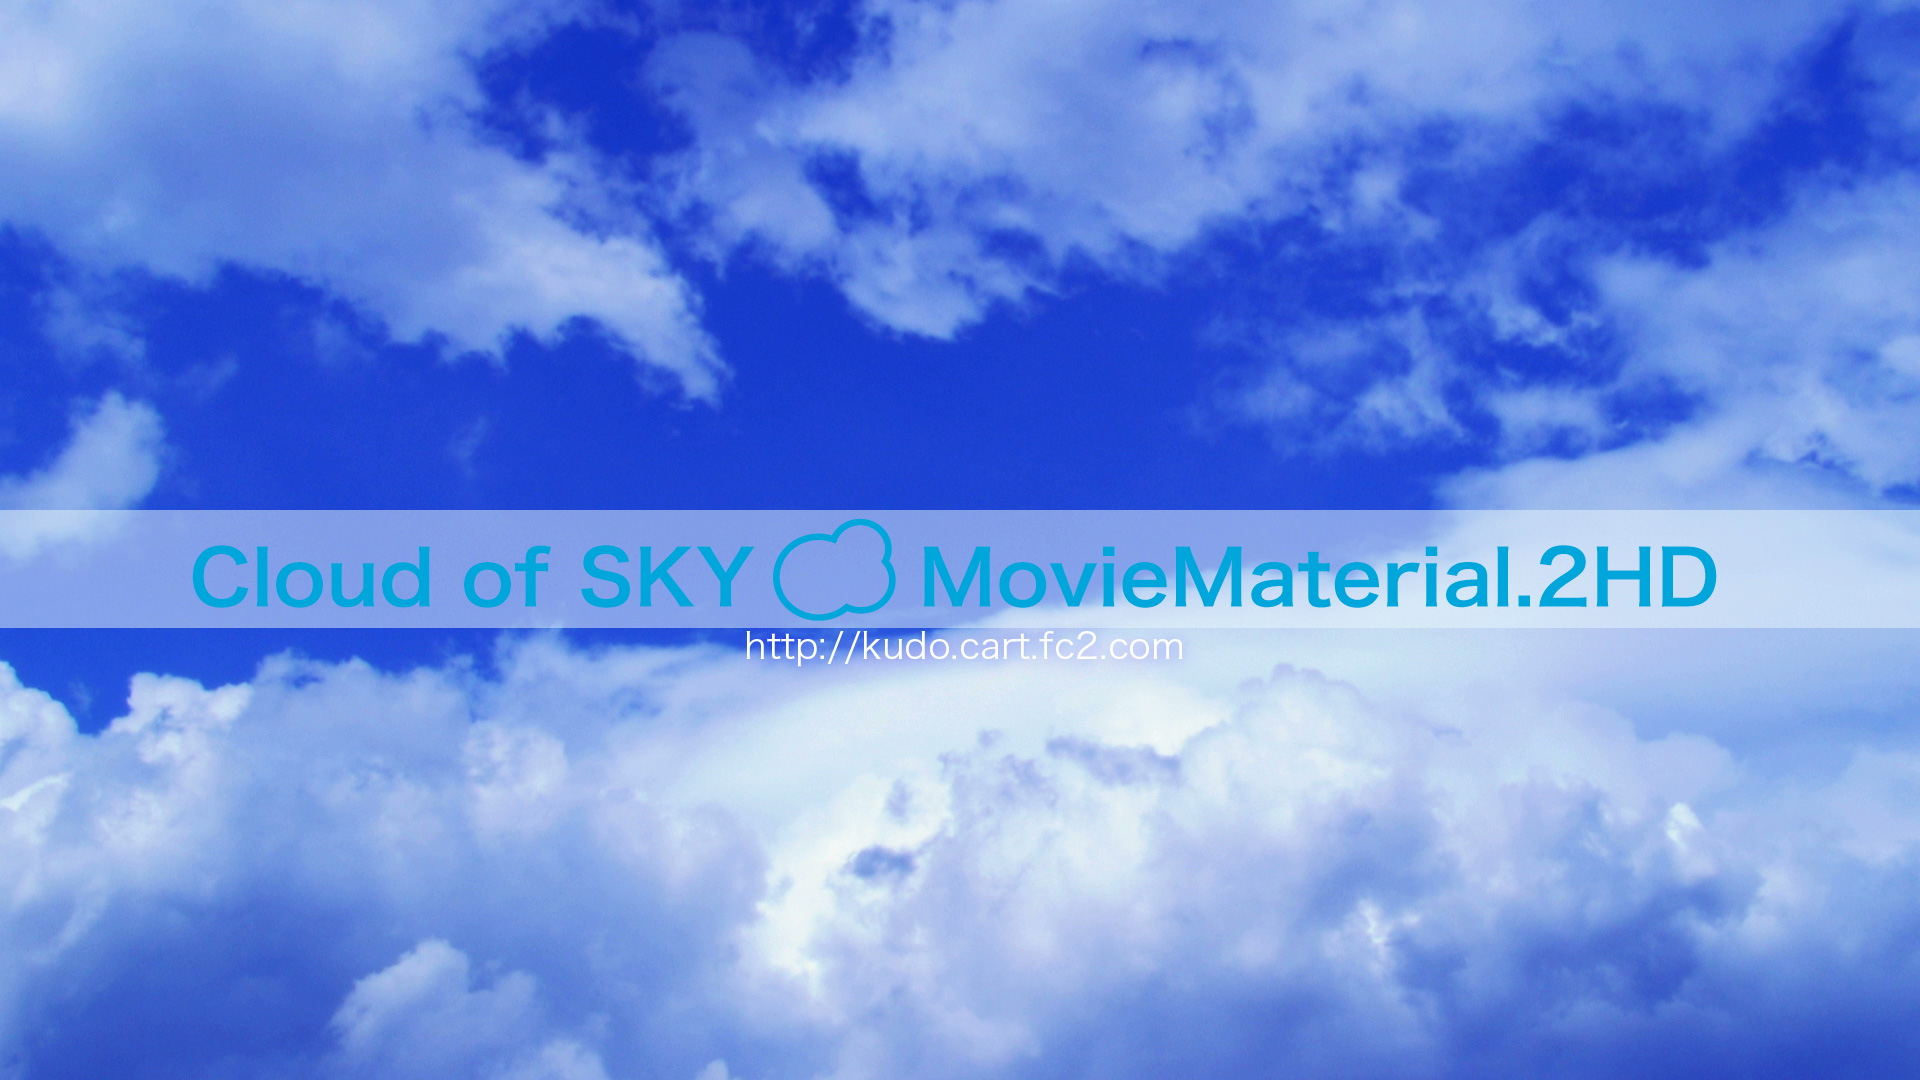 【Cloud of SKY MovieMaterial.HDSET】 ロイヤリティフリー フルハイビジョン動画素材集 Image.3